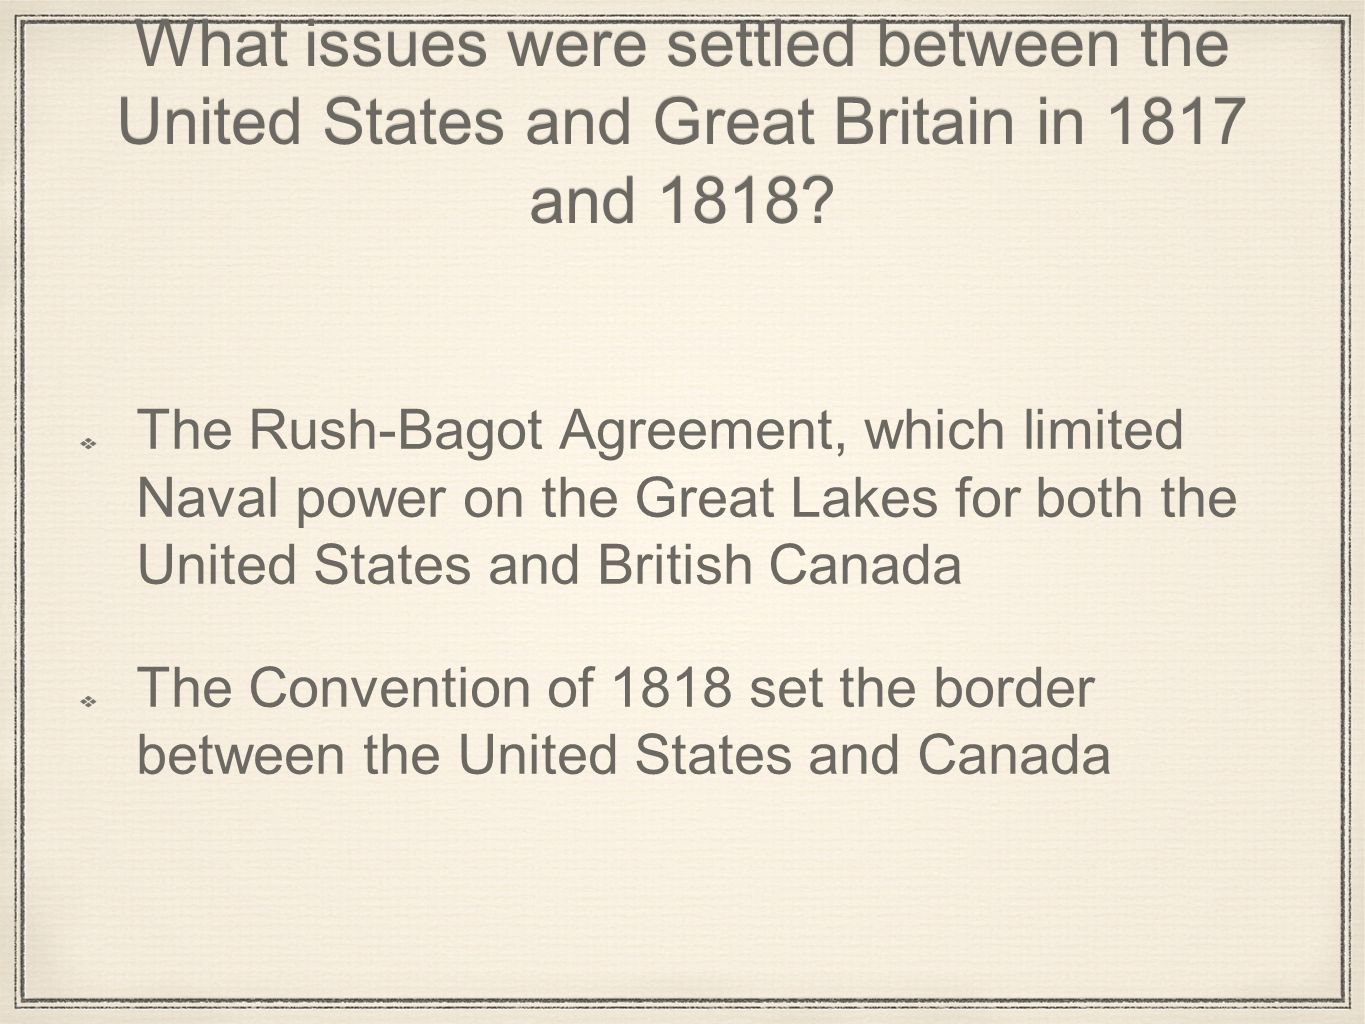 What issues were settled between the United States and Great Britain in 1817 and 1818.